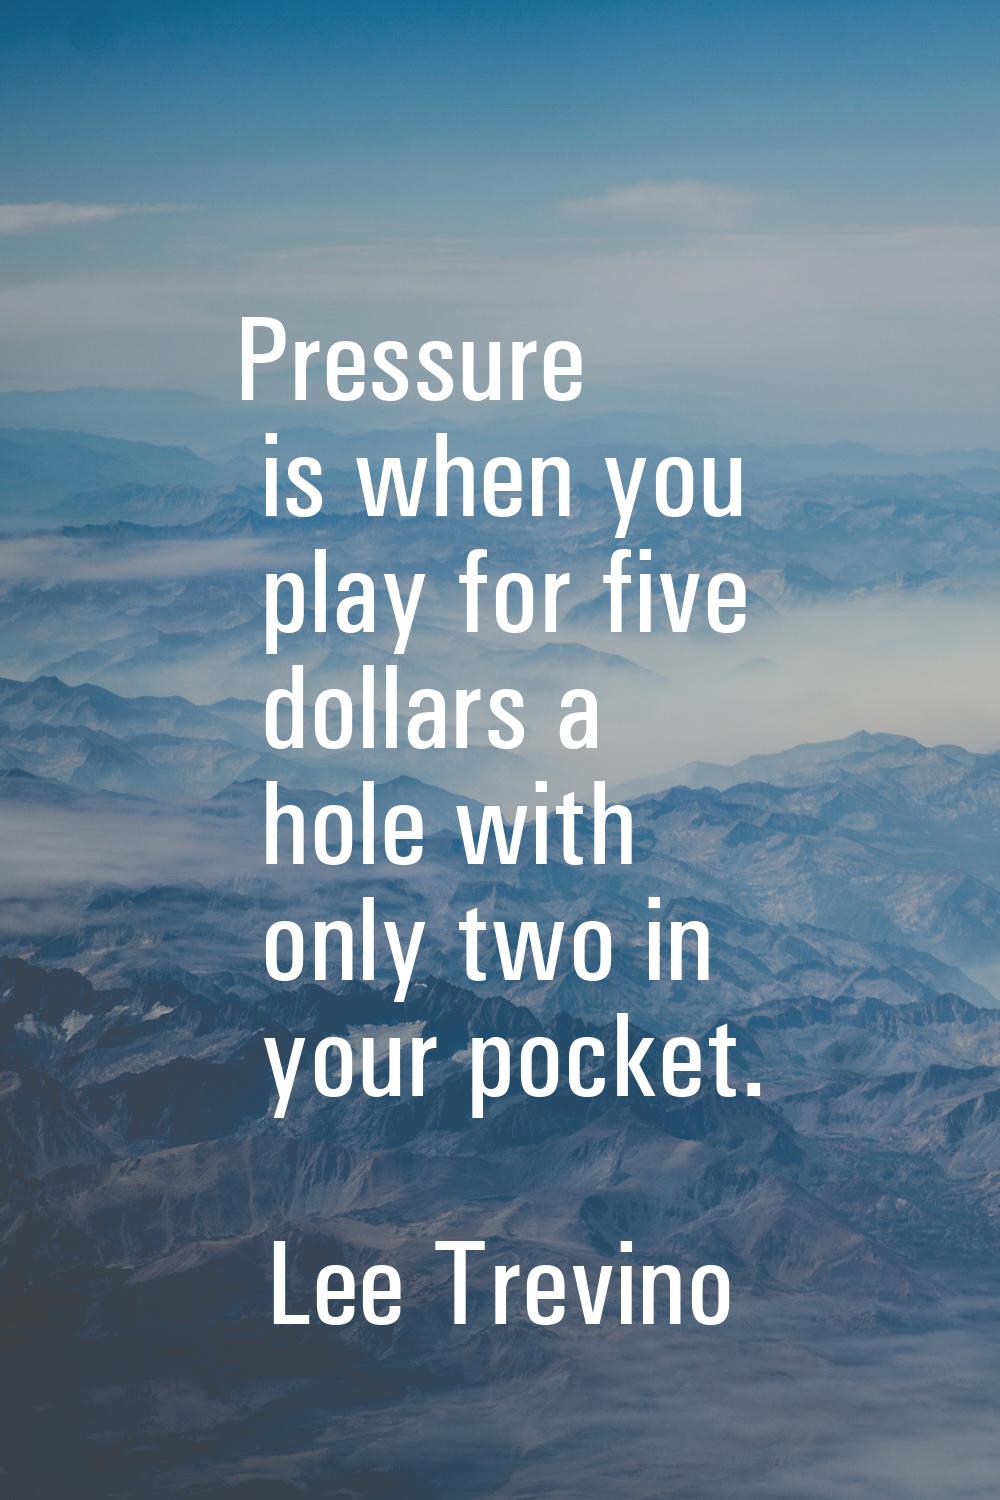 Pressure is when you play for five dollars a hole with only two in your pocket.